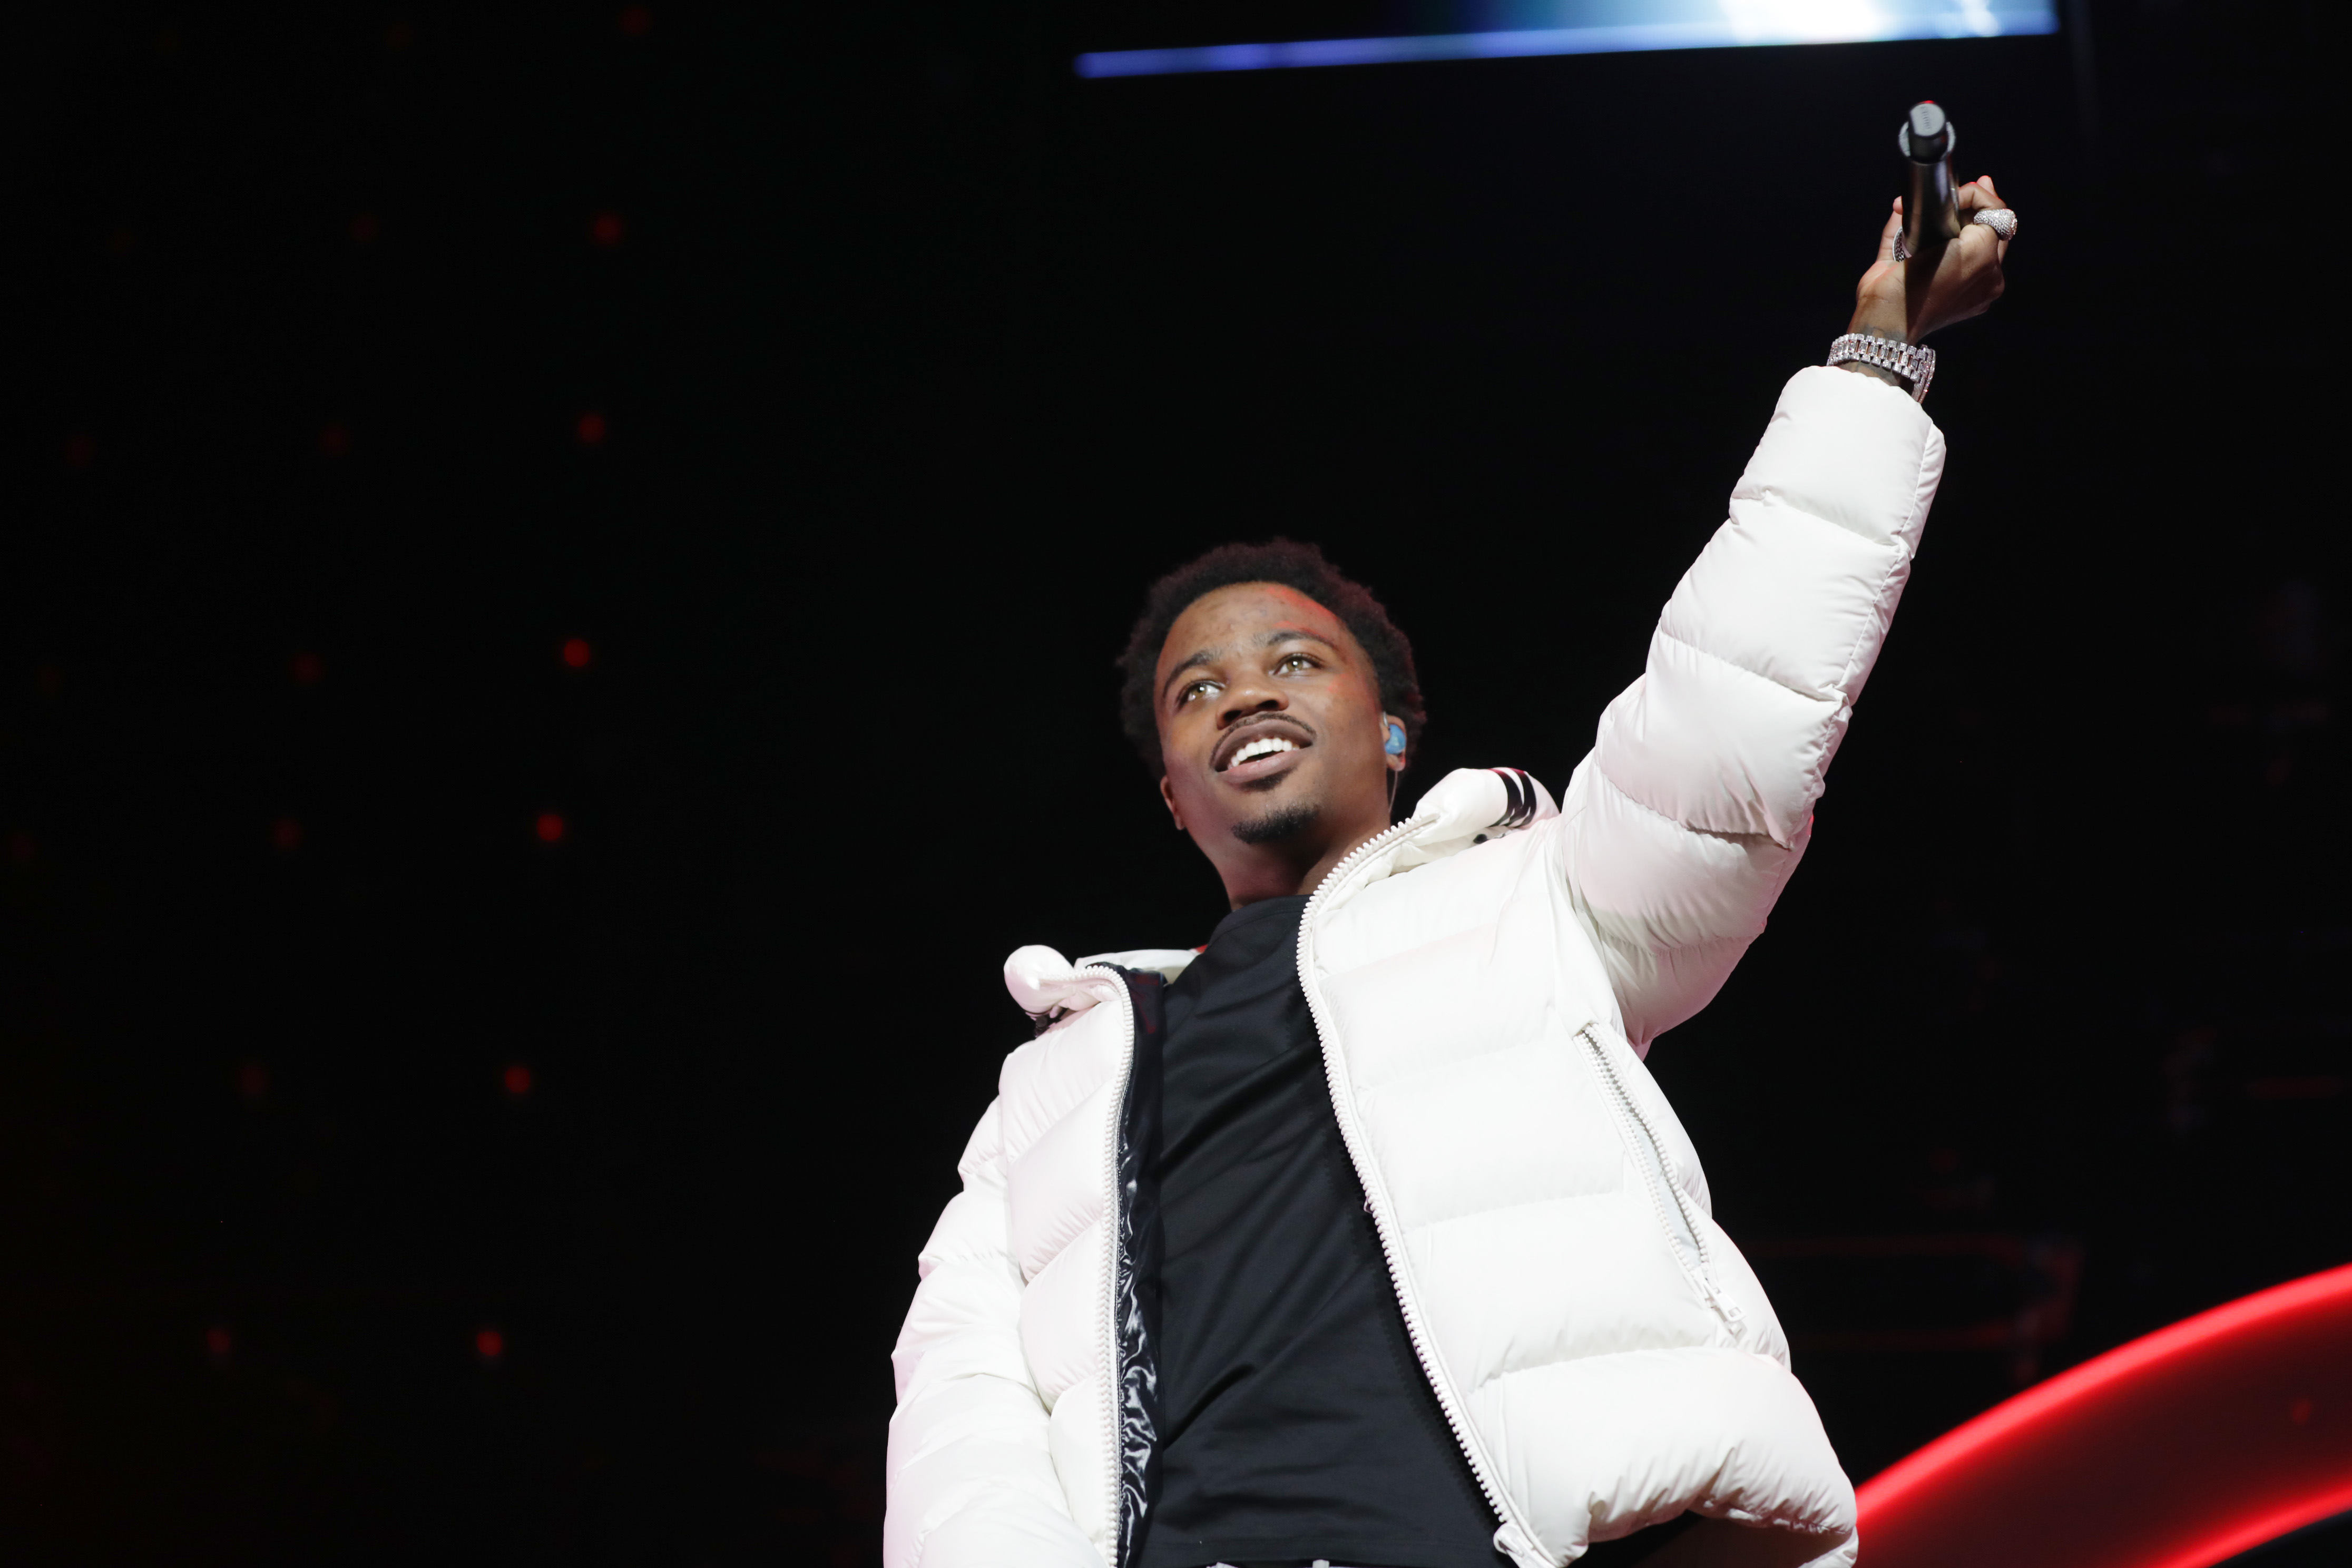 Roddy Ricch’s “The Box” Claims No. 1 Spot On Charts For Second Week In A Row